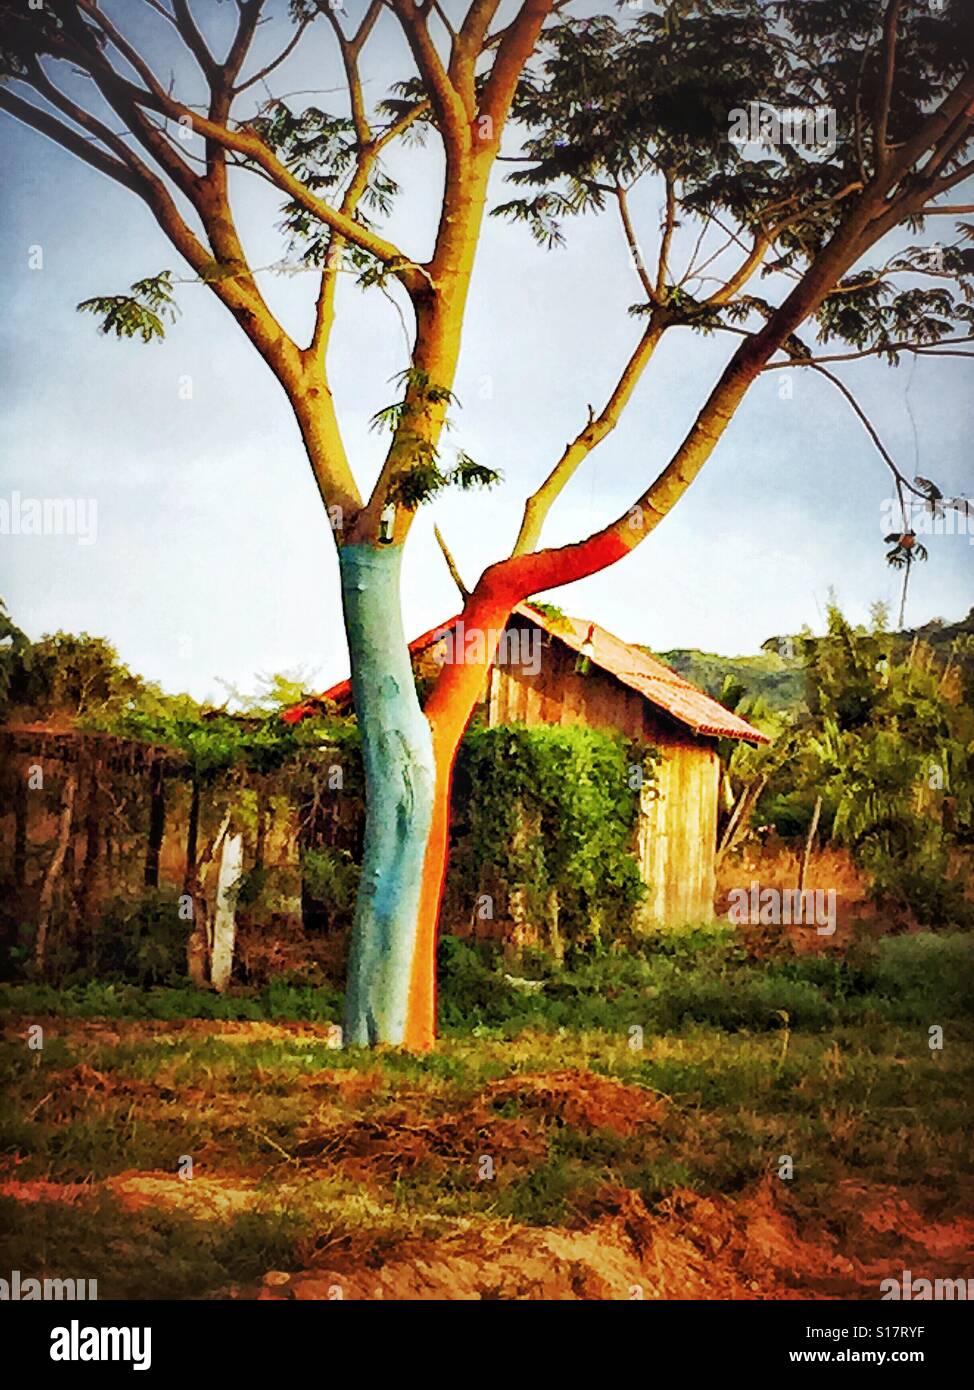 A tree trunk is painted in pretty colors near a building in a field in rural Nayarit, Mexico. Stock Photo